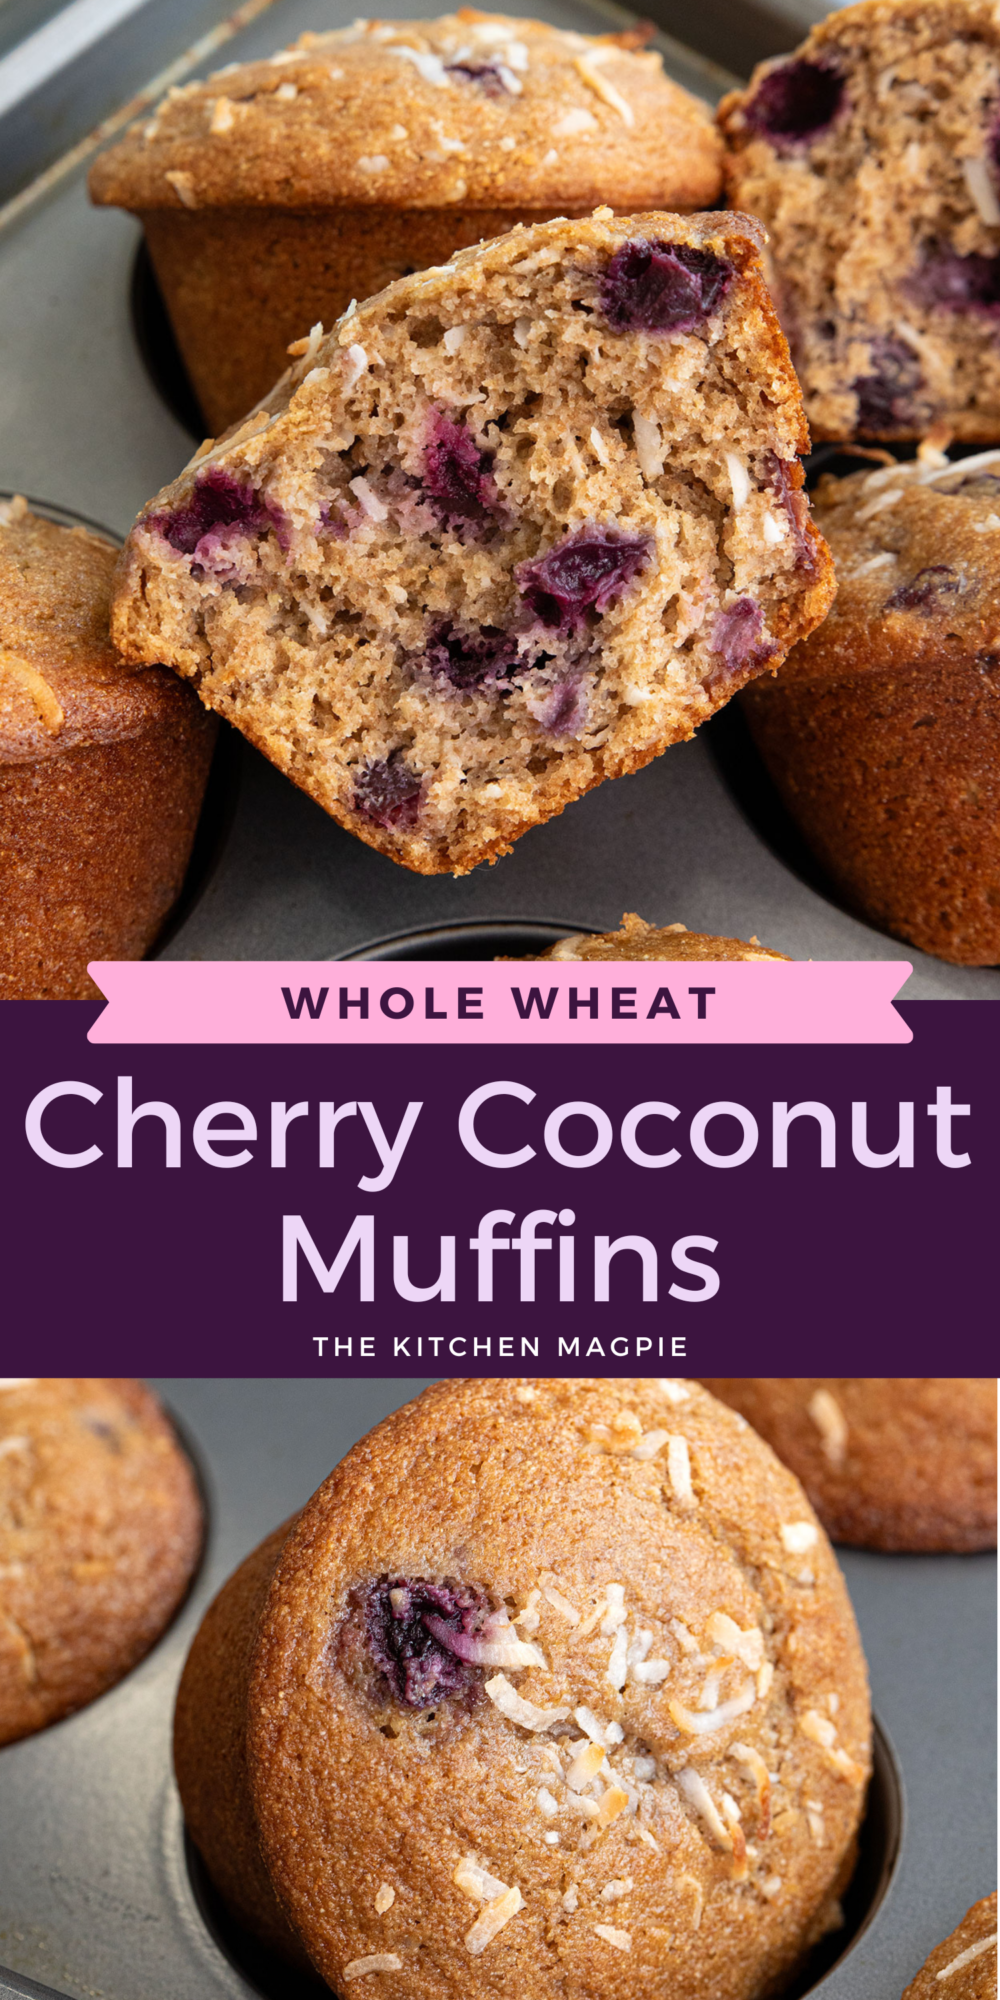  These muffins are filled with juicy fresh cherries, bits of coconut throughout, and a sprinkle of toasted coconut on top. They are a great breakfast to take on the go!